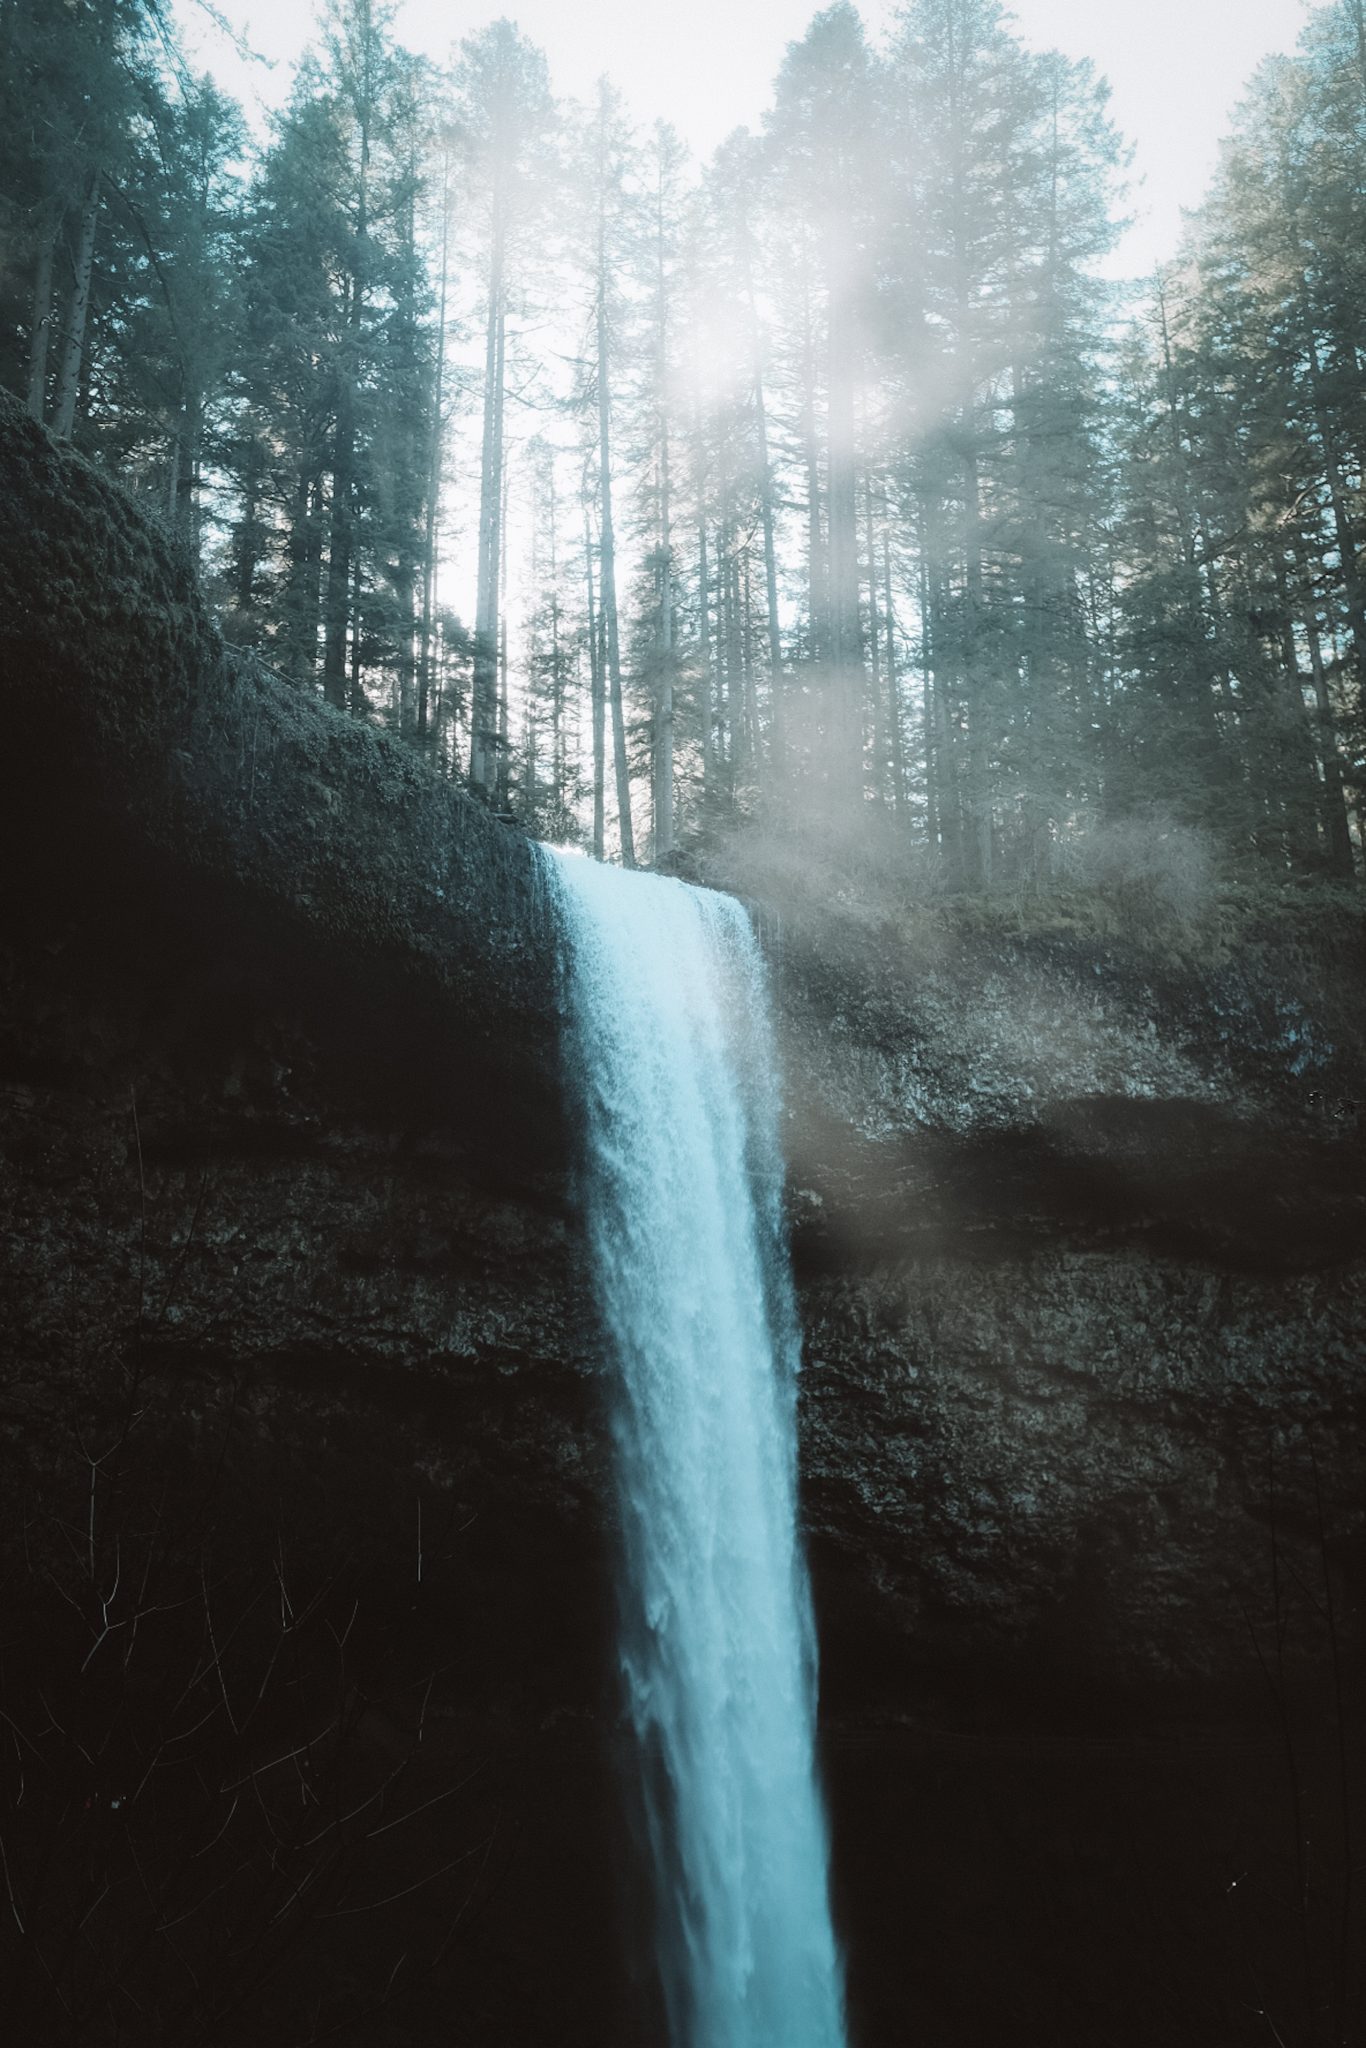 Light shining over top of a waterfall